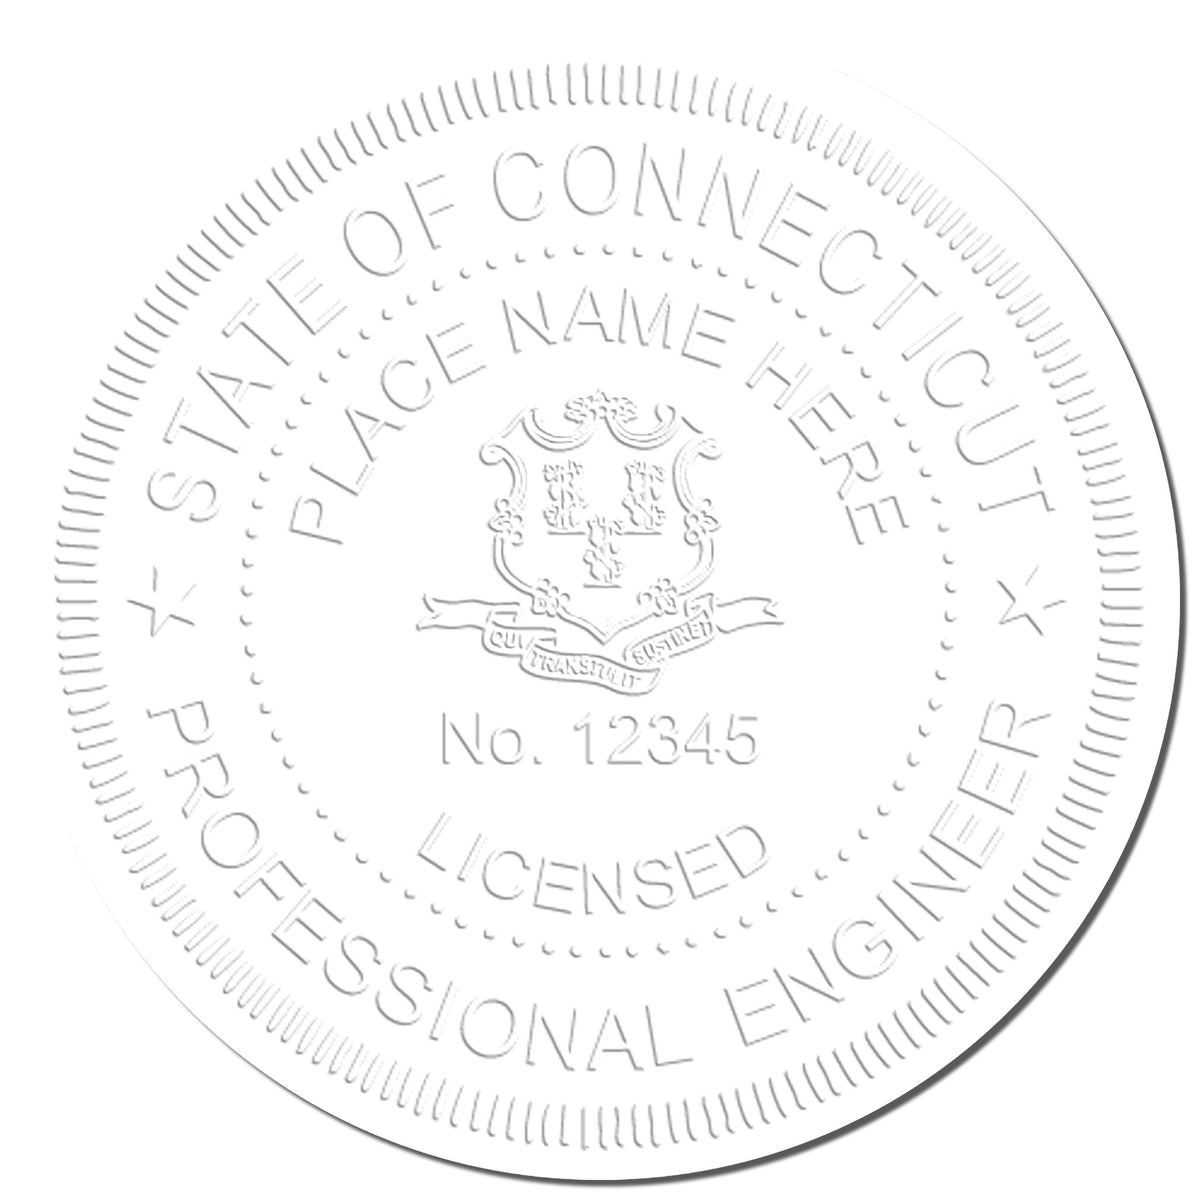 This paper is stamped with a sample imprint of the Gift Connecticut Engineer Seal, signifying its quality and reliability.